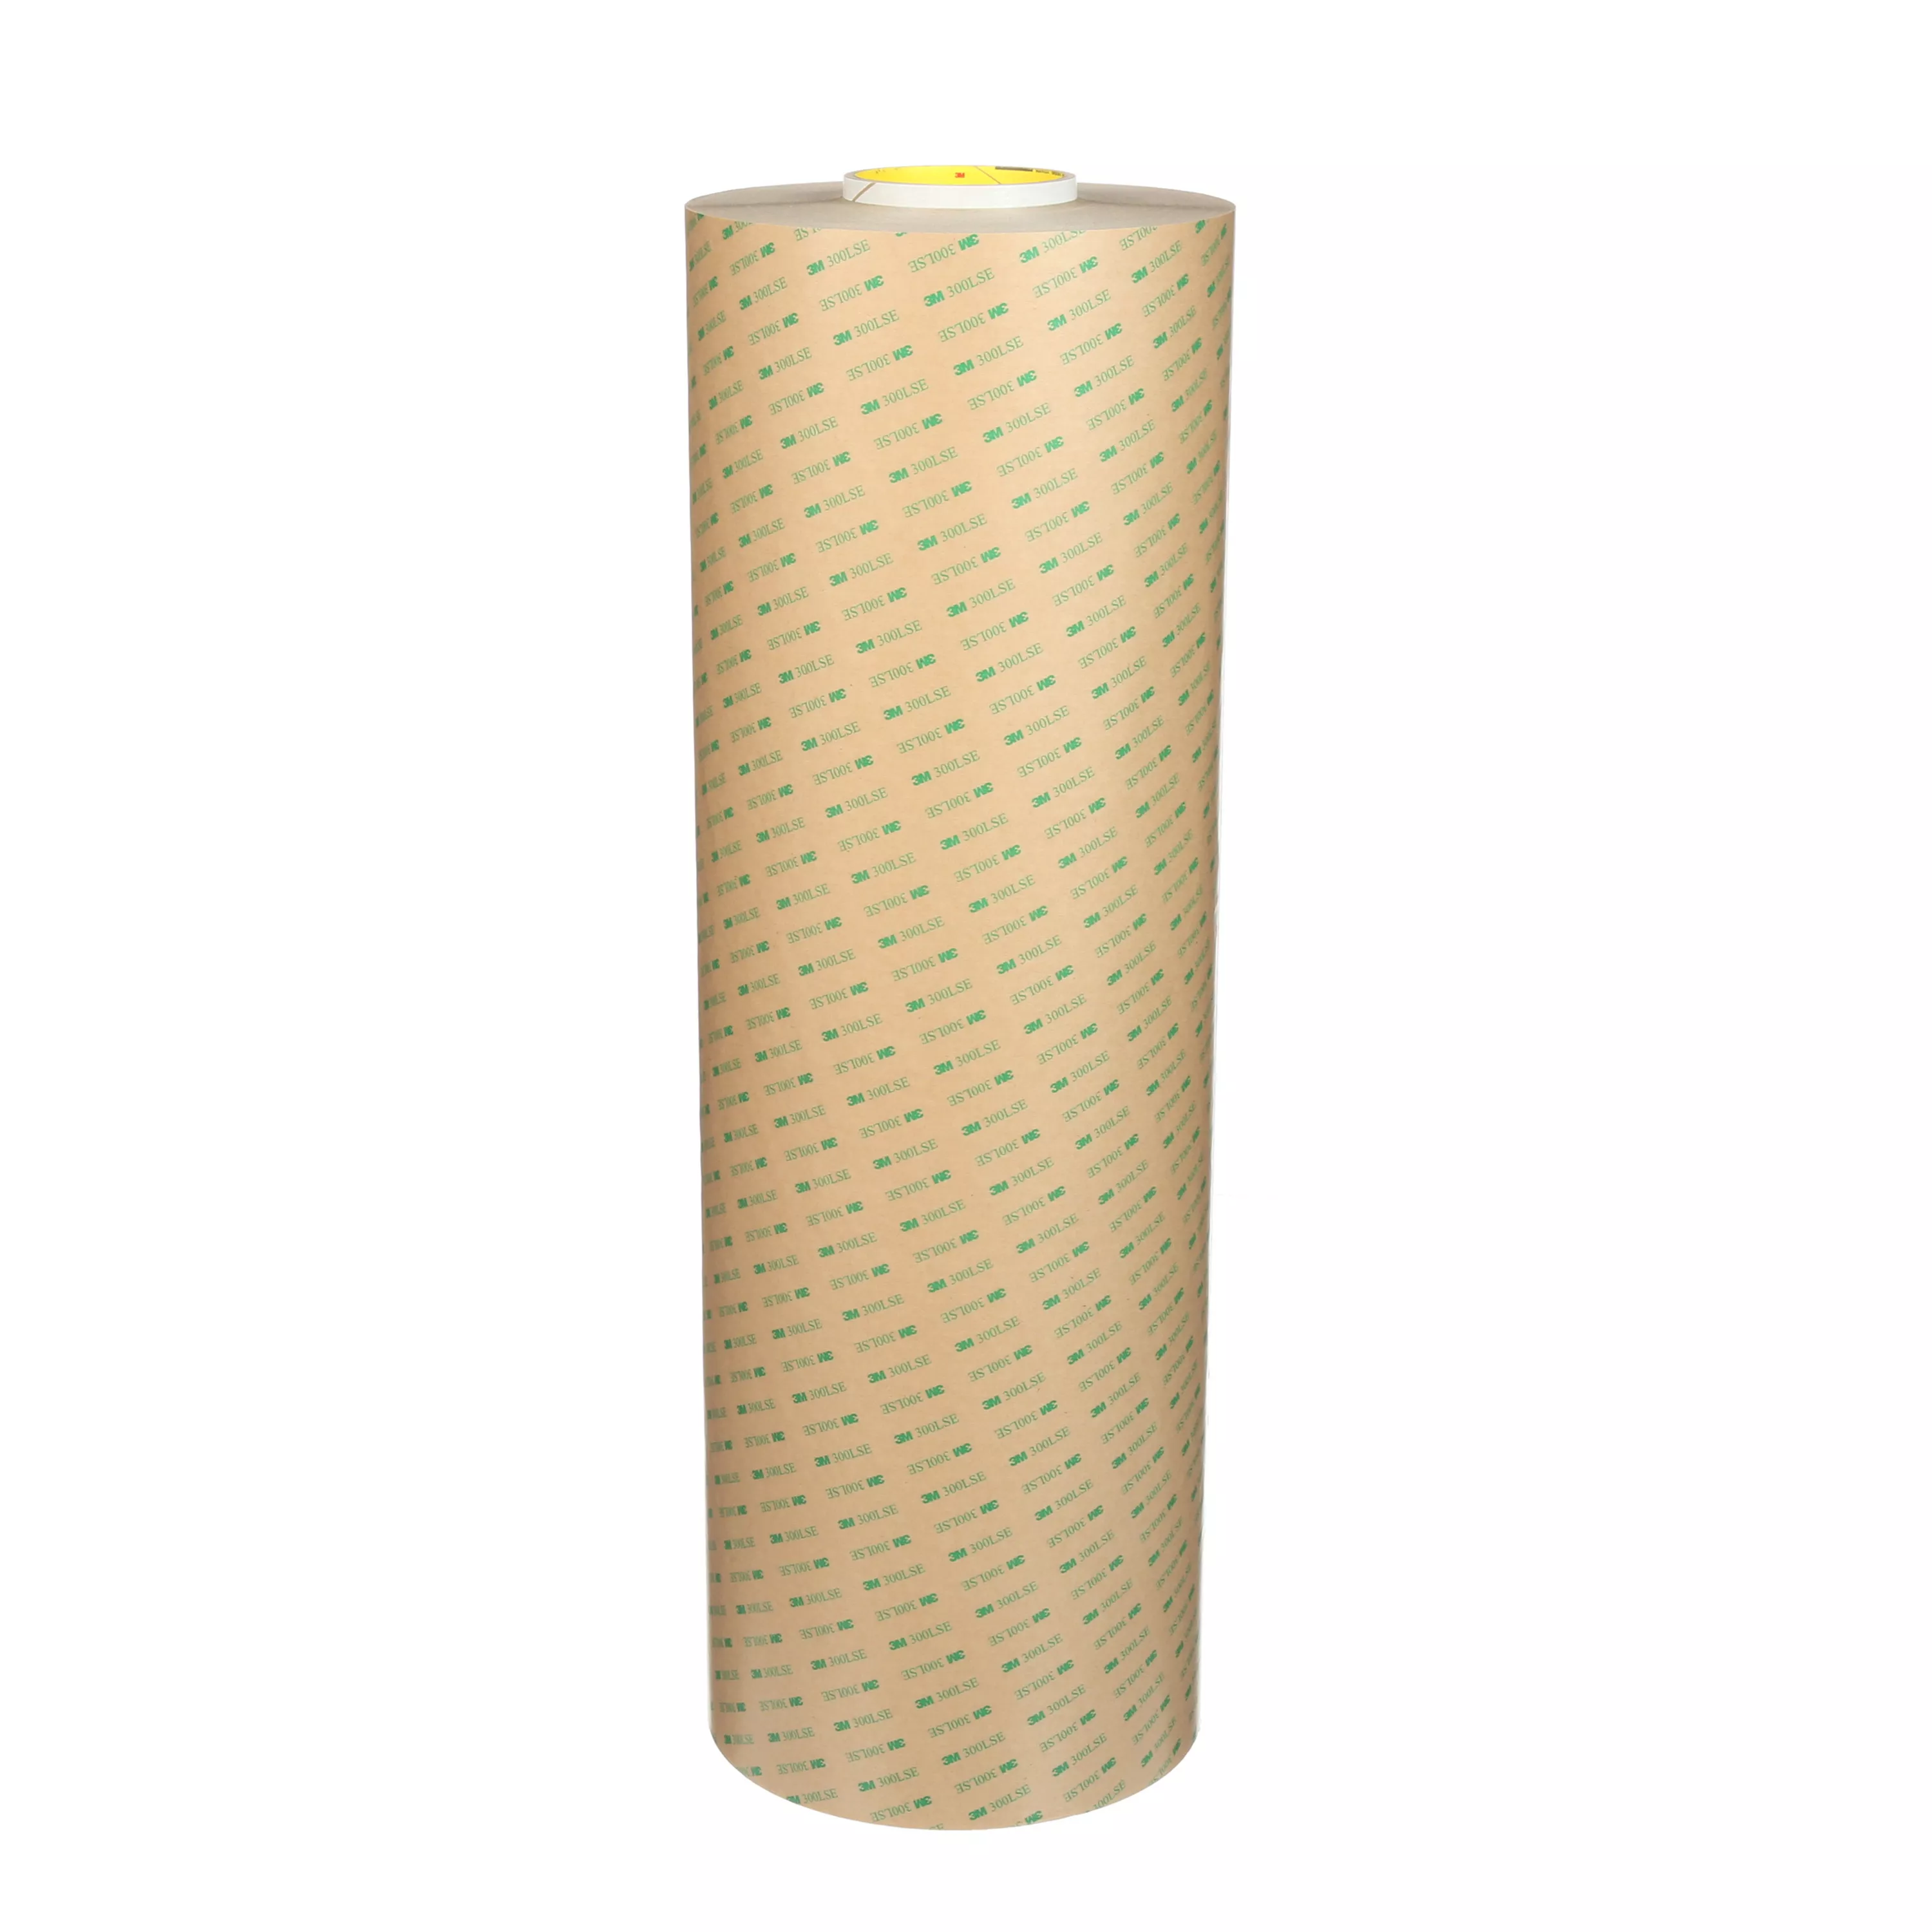 3M™ Adhesive Transfer Tape 9471LE, Clear, 24 in x 180 yd, 2.3 mil, 1
Roll/Case